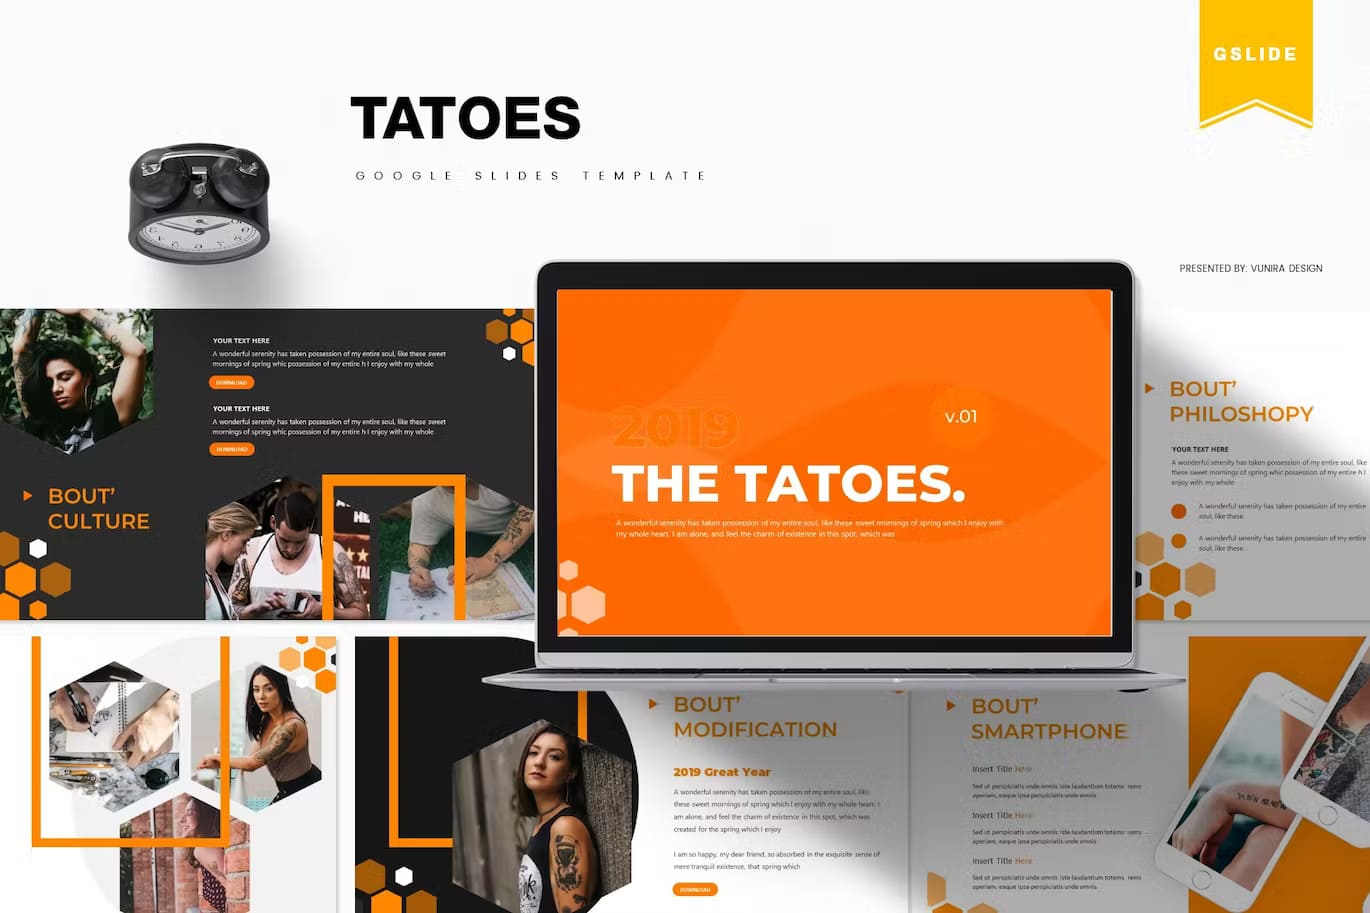 Preview Tatoes google slides template on the laptop.